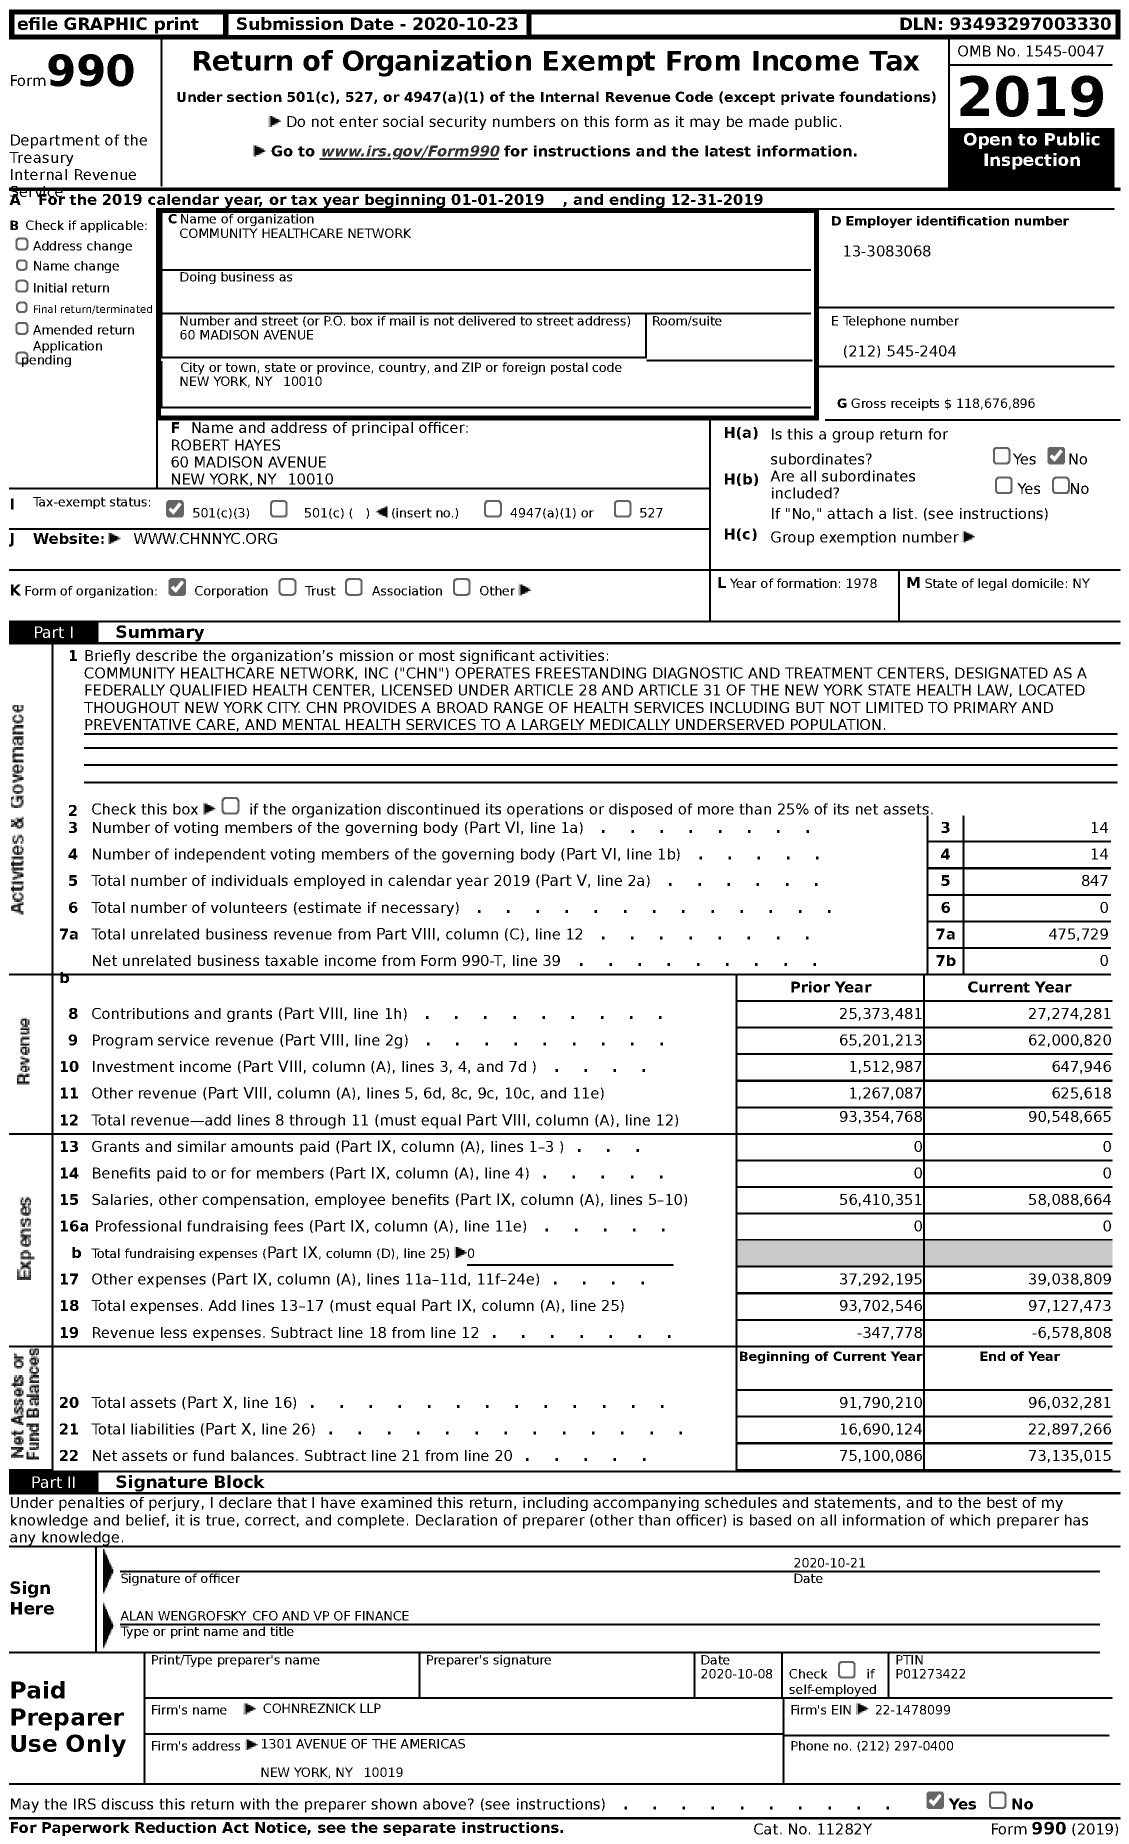 Image of first page of 2019 Form 990 for Community Healthcare Network (CHN)